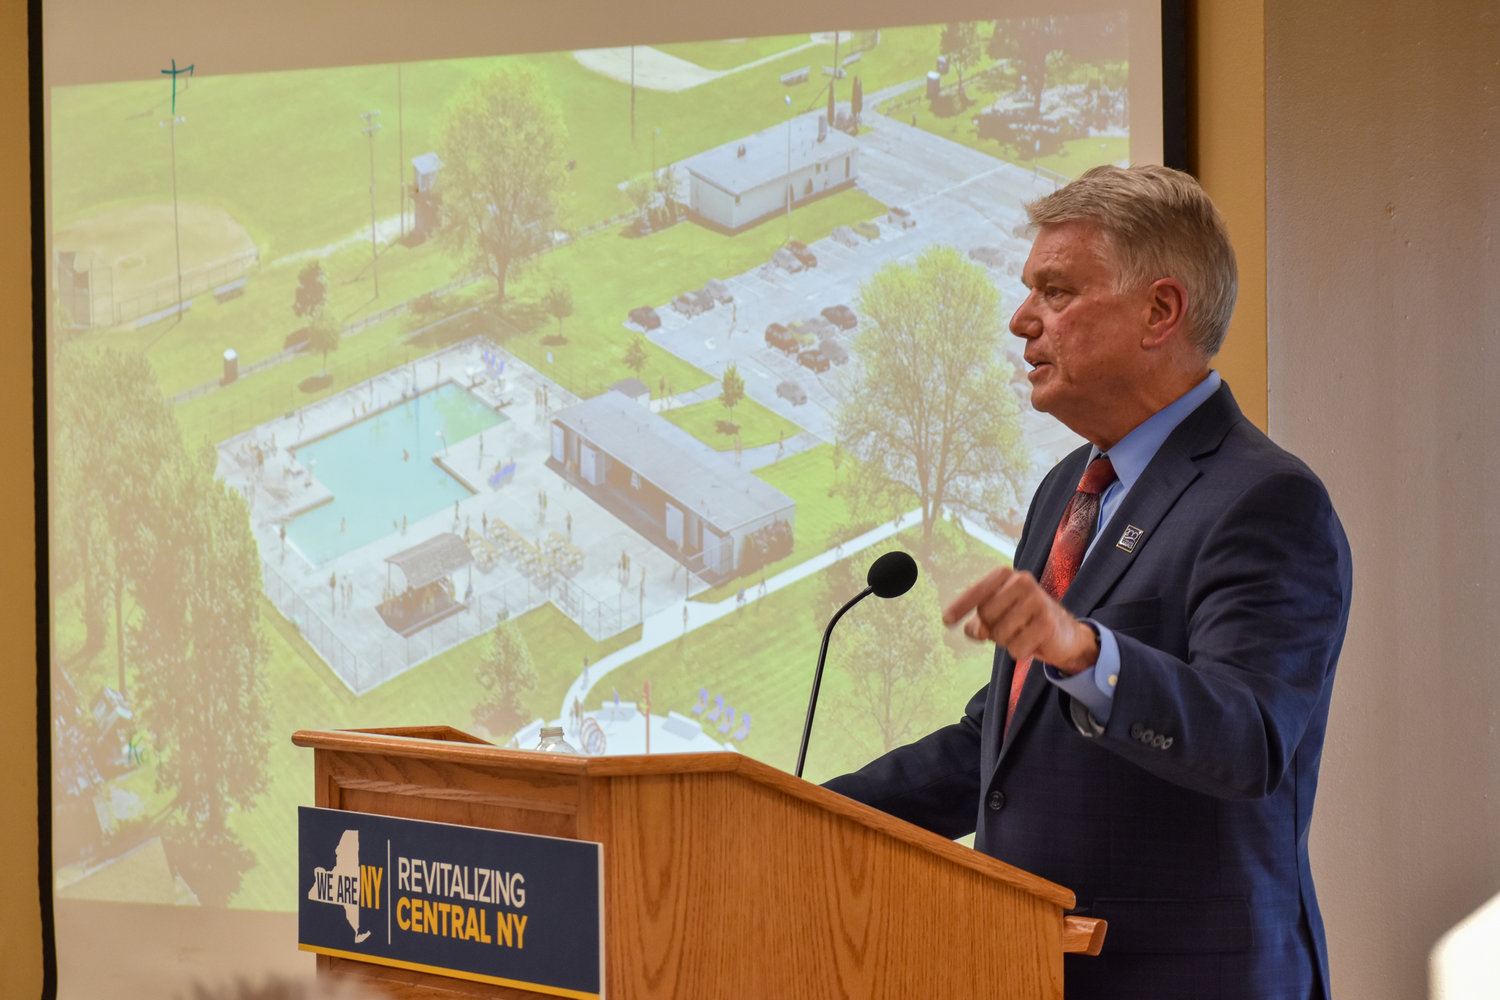 New York State Canal Corporation Director Brian Stratton announced the eight projects to be awarded Downtown Revitalization Initiative (DRI) funding in the City of Oneida. Pictured is renderings of upgrades to be made at Veteran's Memorial Field.